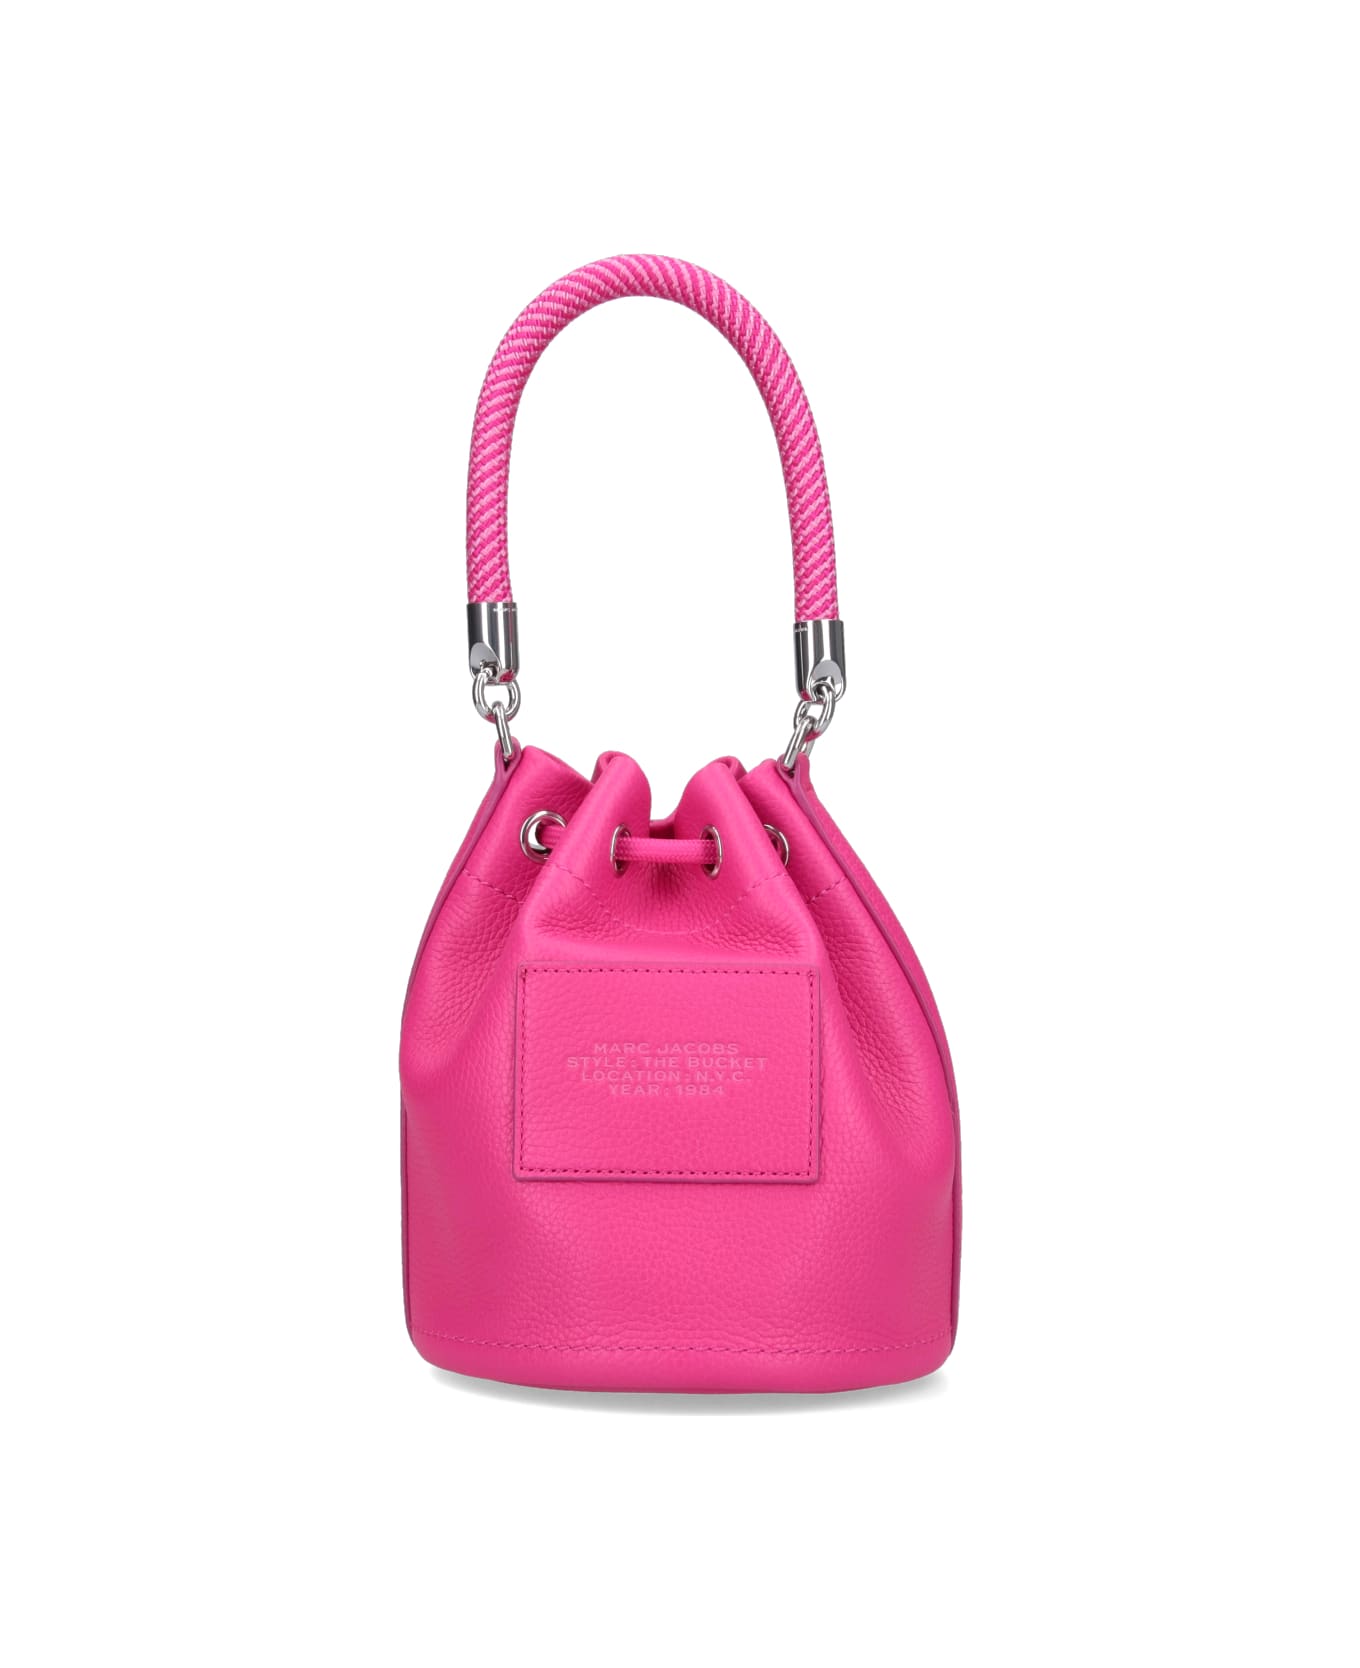 Marc Jacobs "the Leather Bucket" Bag - Pink トートバッグ